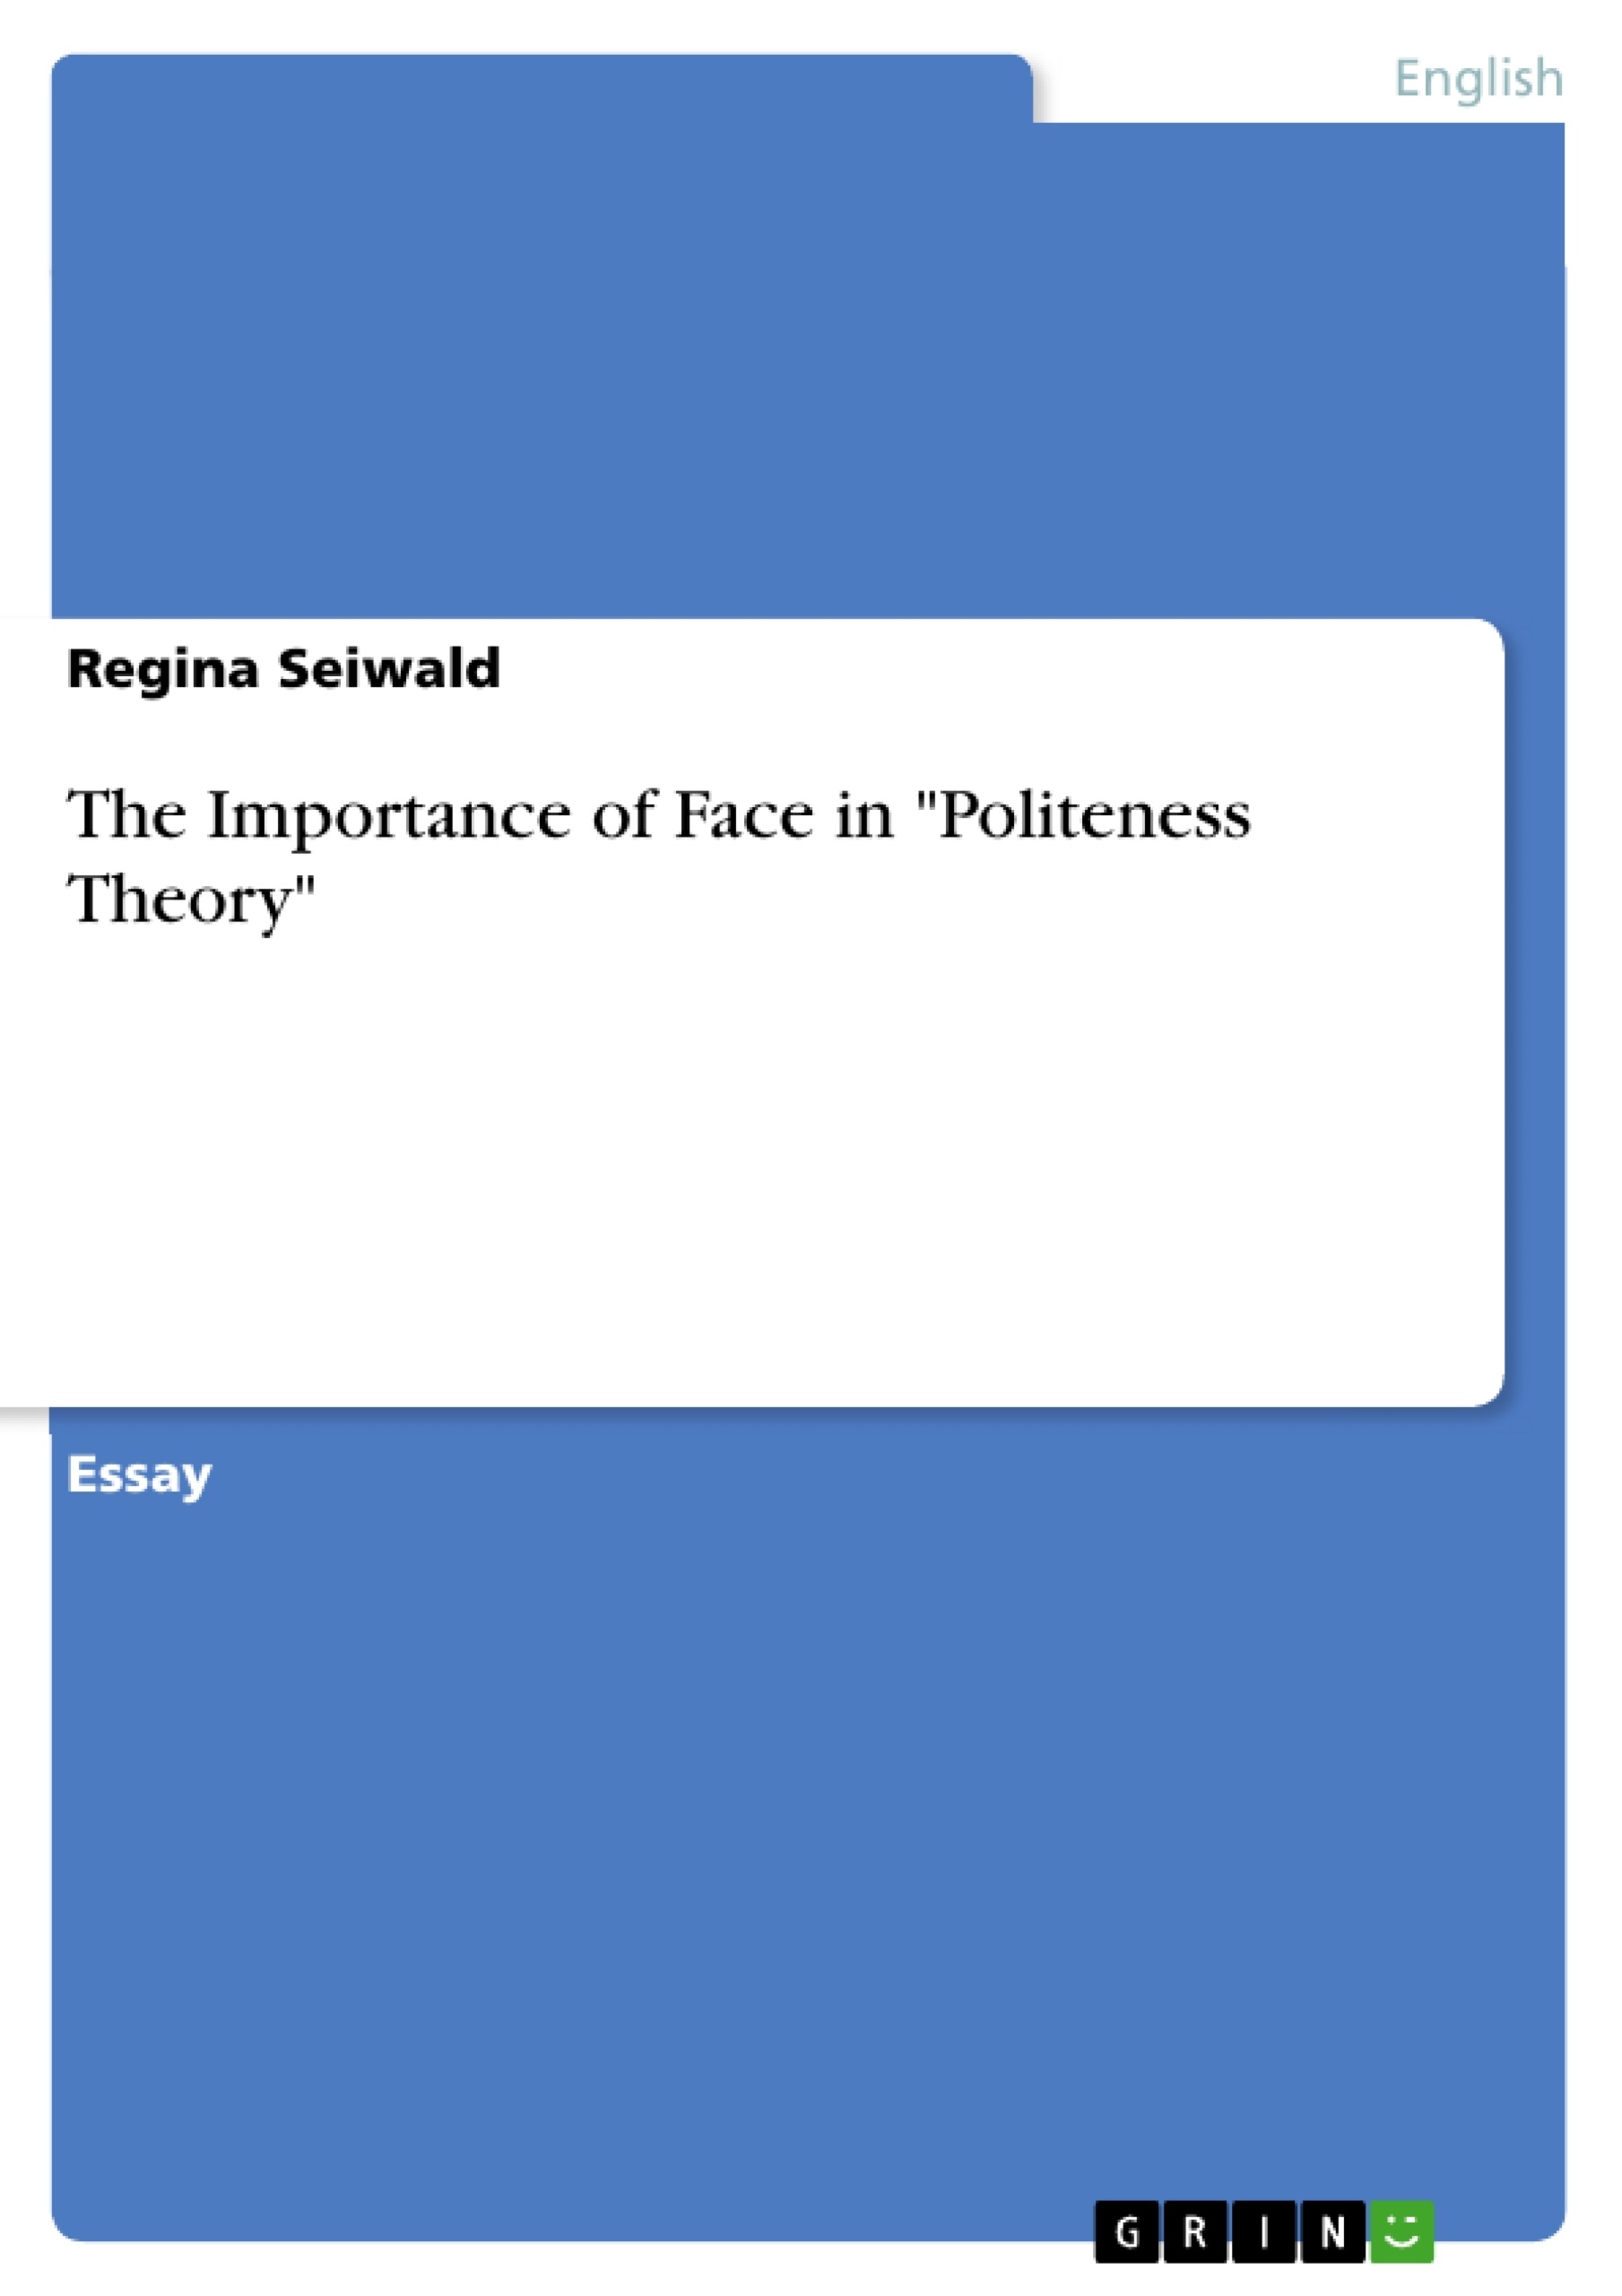 Title: The Importance of Face in "Politeness Theory"